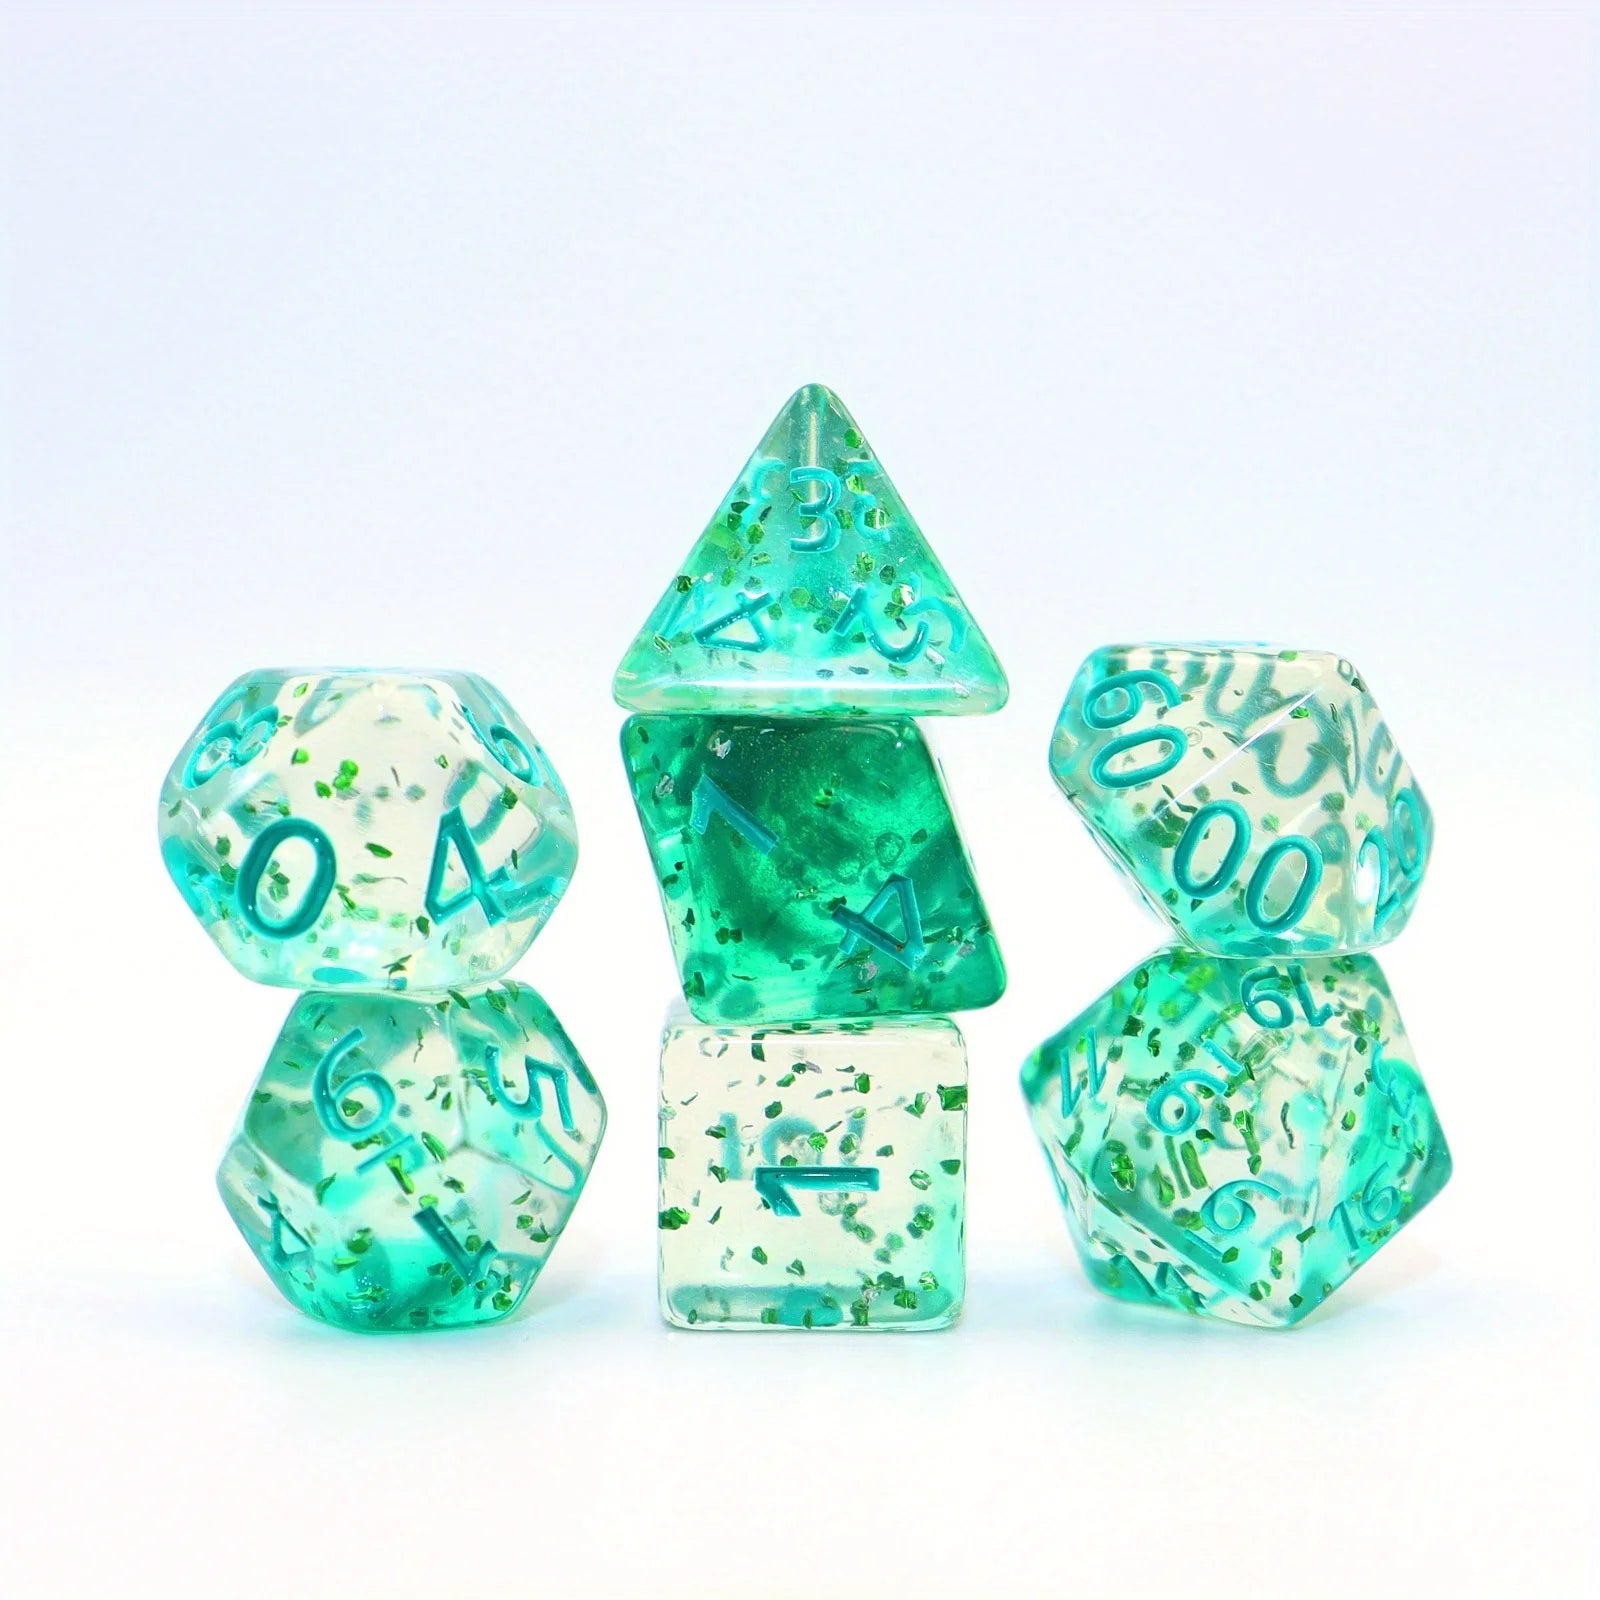 7pcs Set Crystal Style DND Dice Set, Polyhedral Table Game Dice Role-Playing RPG Dice With Box green